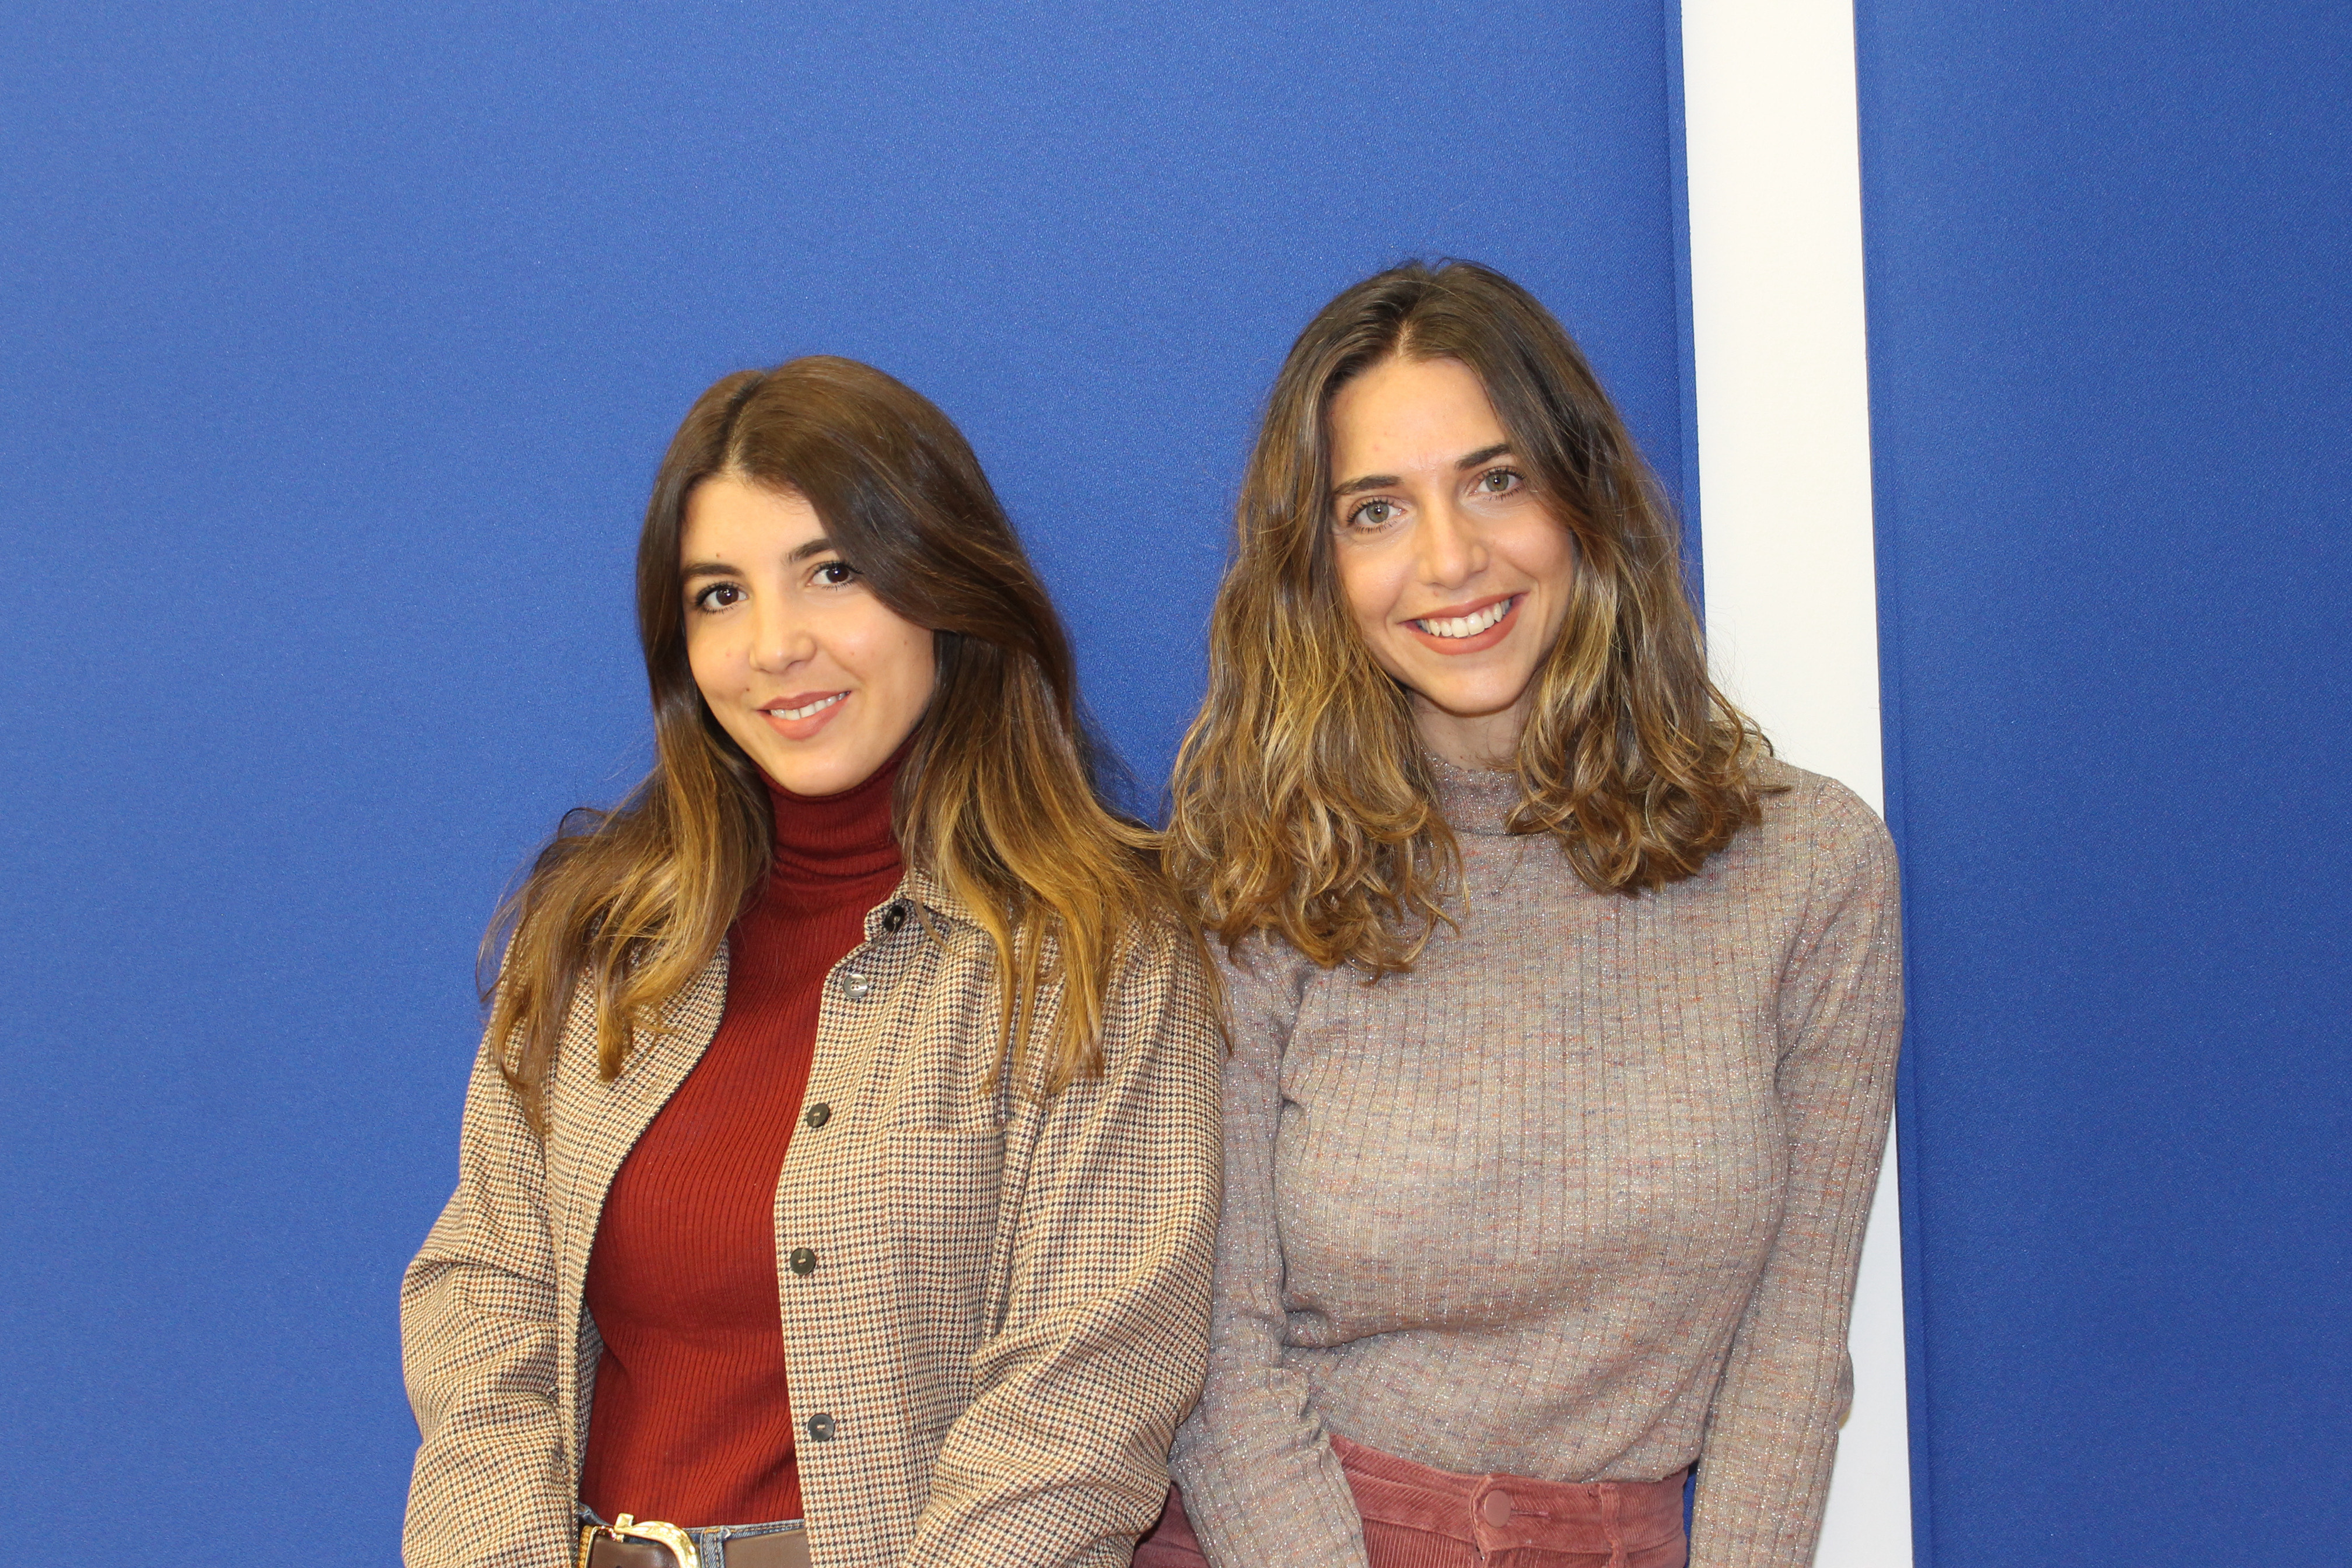 Annamaria Barbaro and Lorenza Silvestri, Empethy co-founders